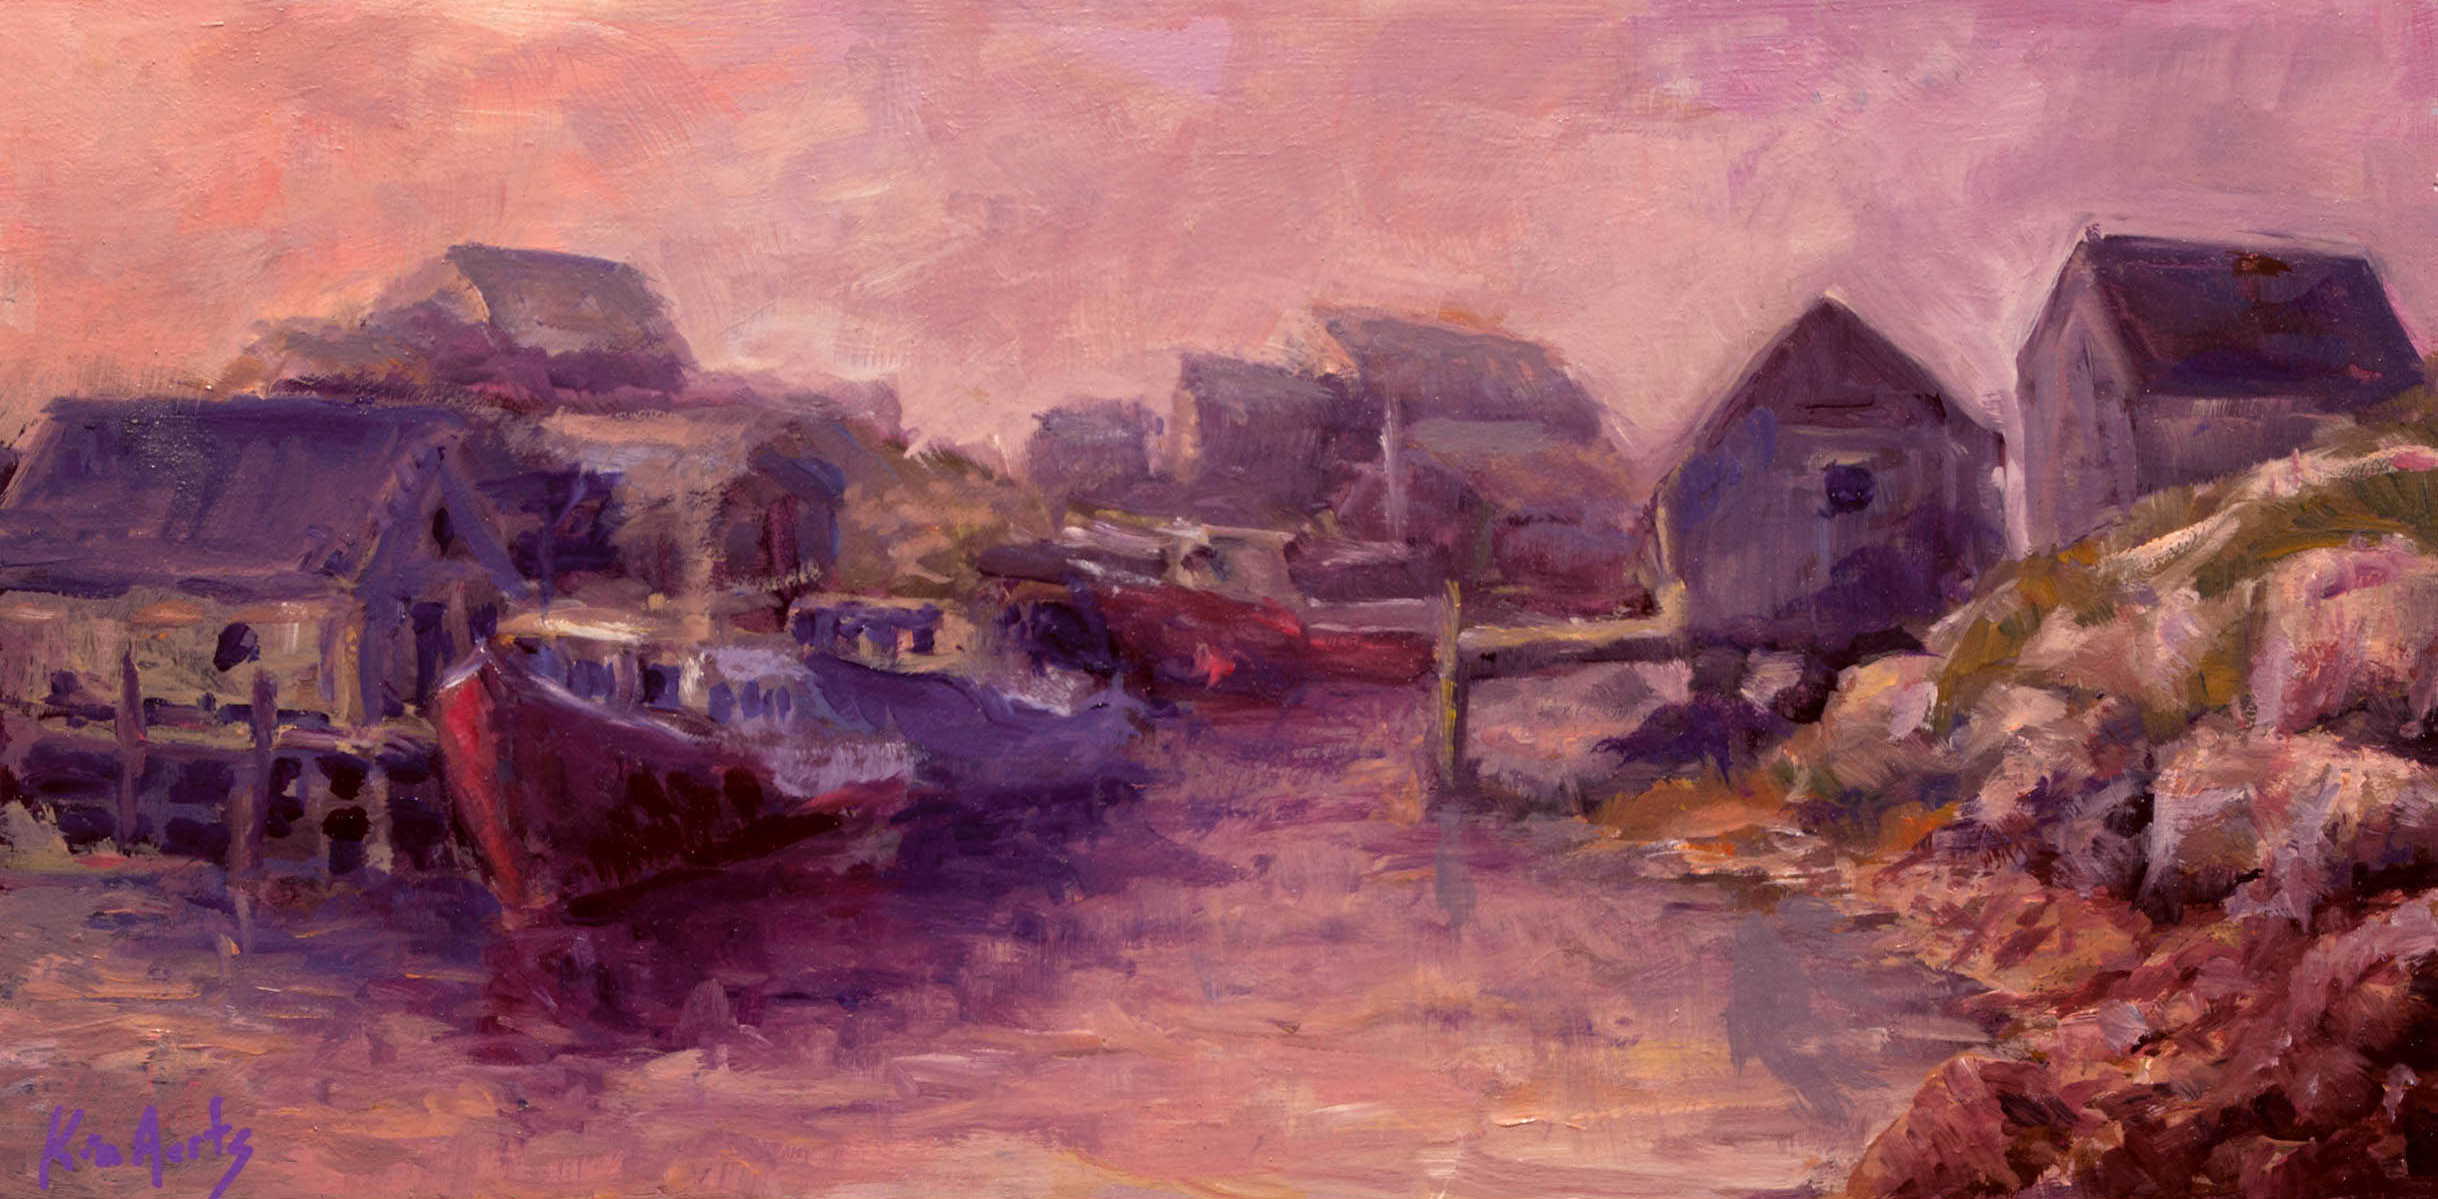 Twilight at Peggy's Cove - oil on wood - Kim Aerts